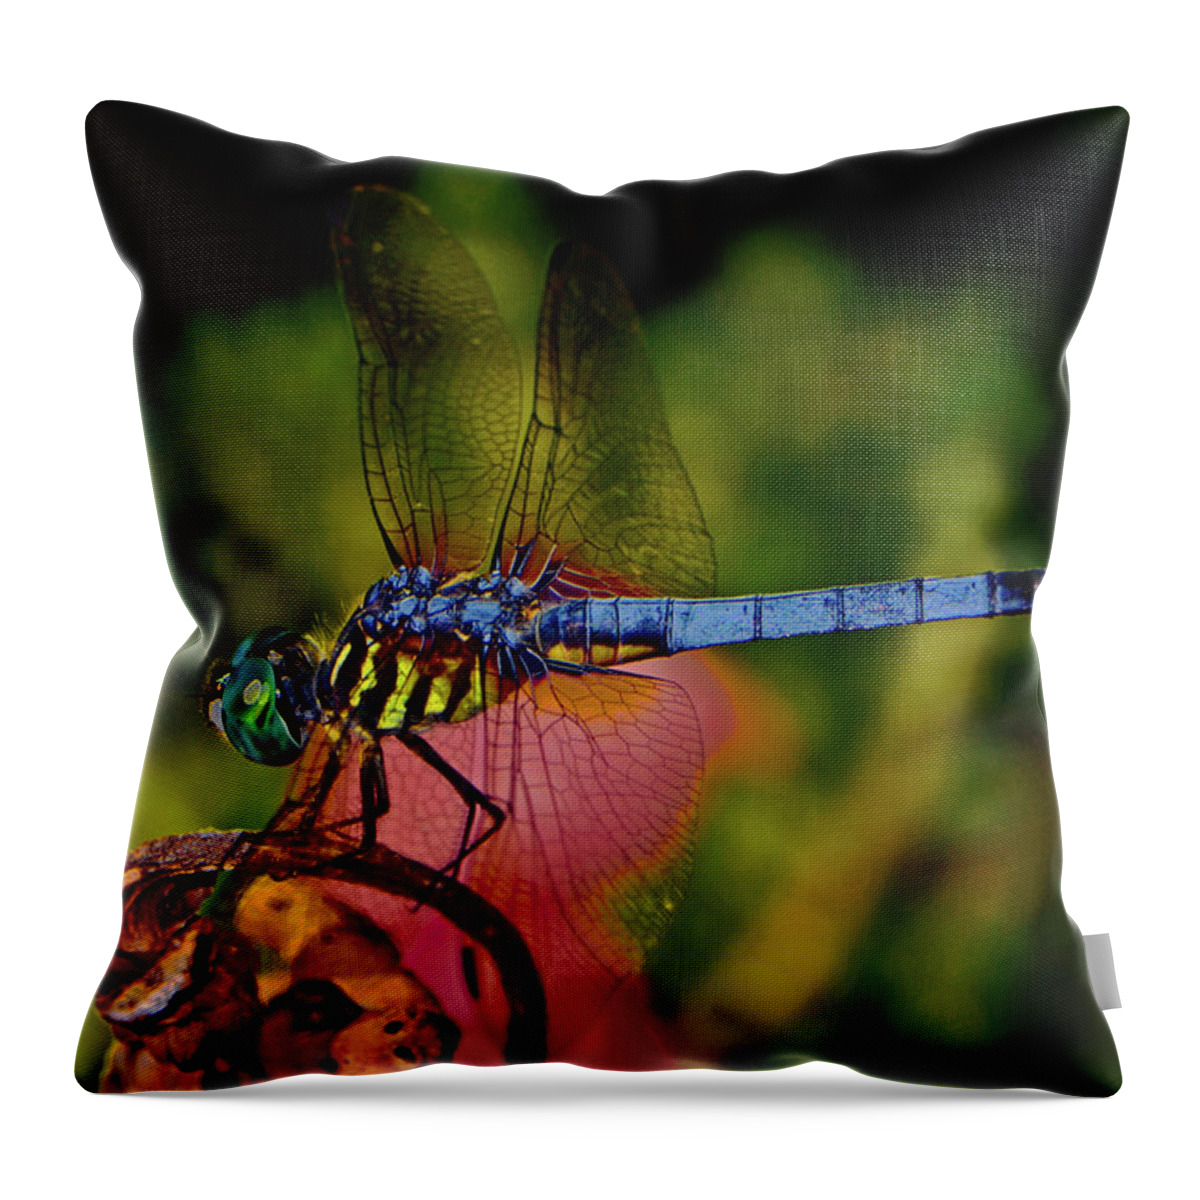 Insect Throw Pillow featuring the photograph A Dragonfly 028 by George Bostian